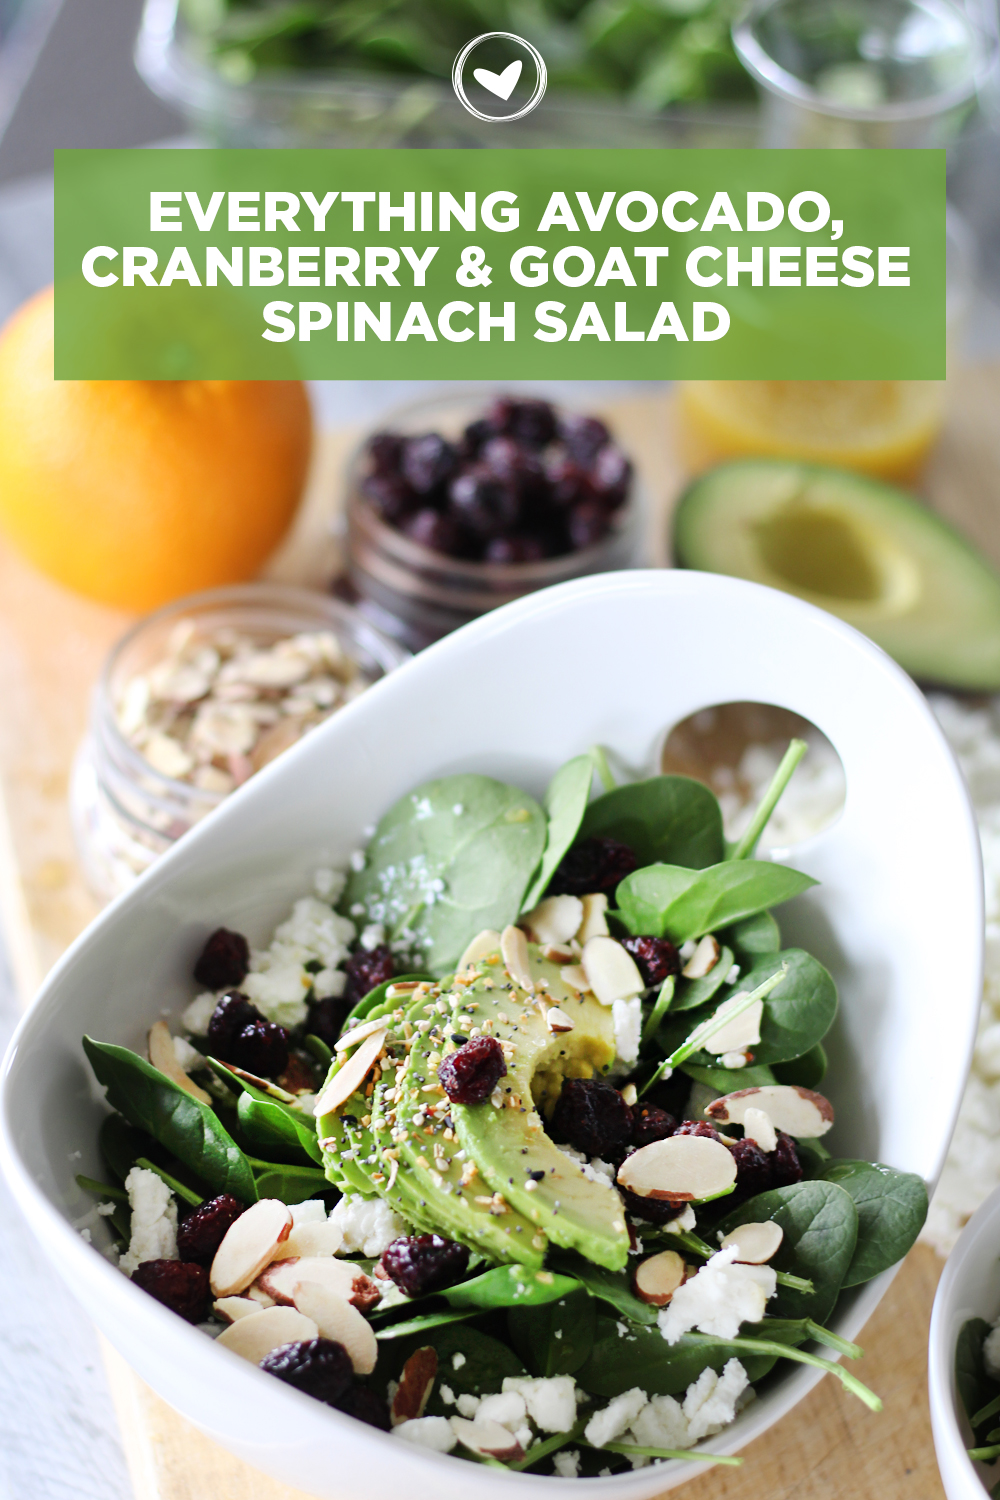 Everything Avocado, Cranberry & Goat Cheese Spinach Salad